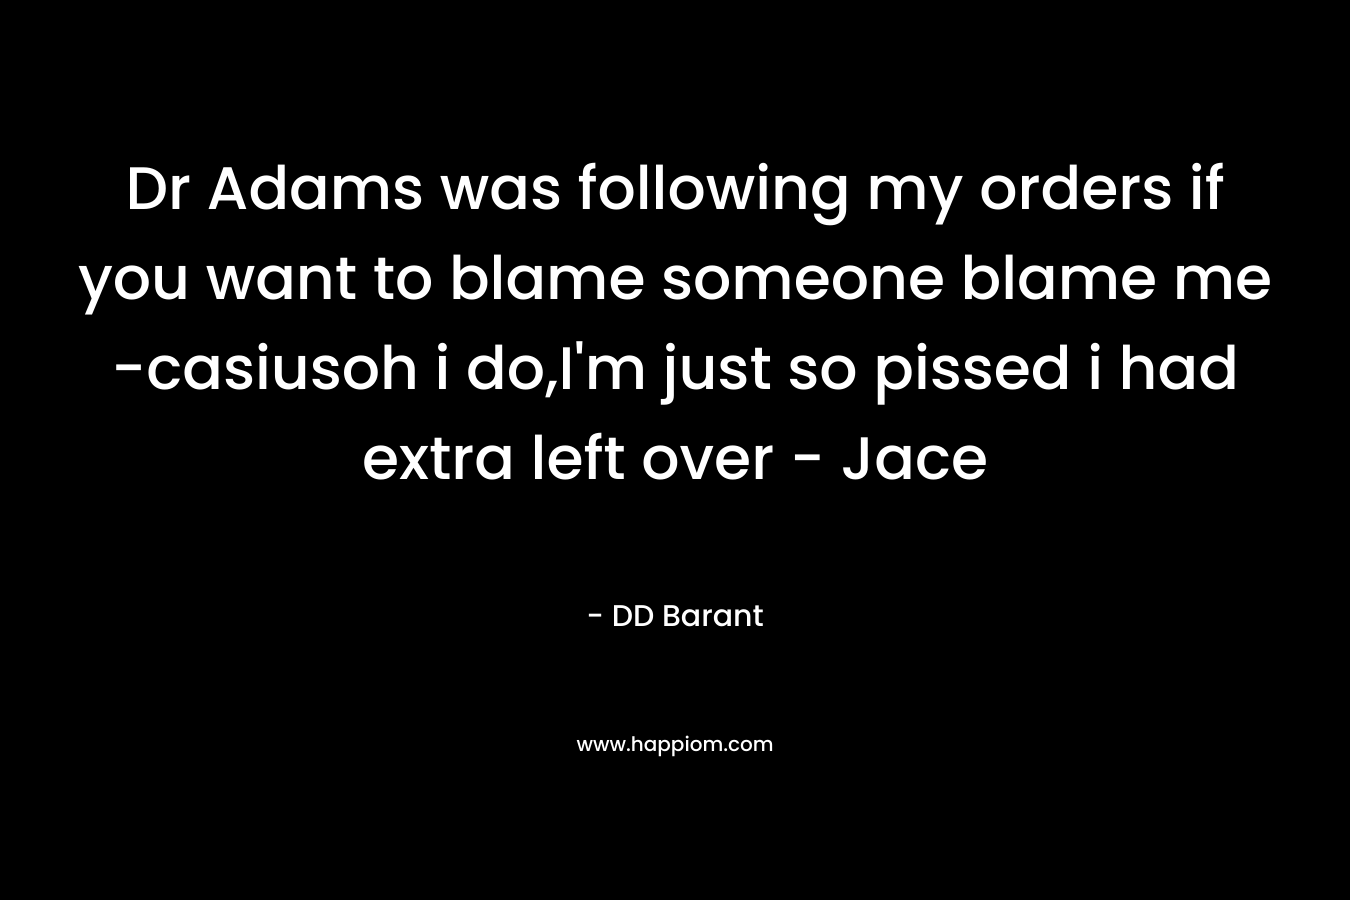 Dr Adams was following my orders if you want to blame someone blame me -casiusoh i do,I’m just so pissed i had extra left over – Jace – DD Barant